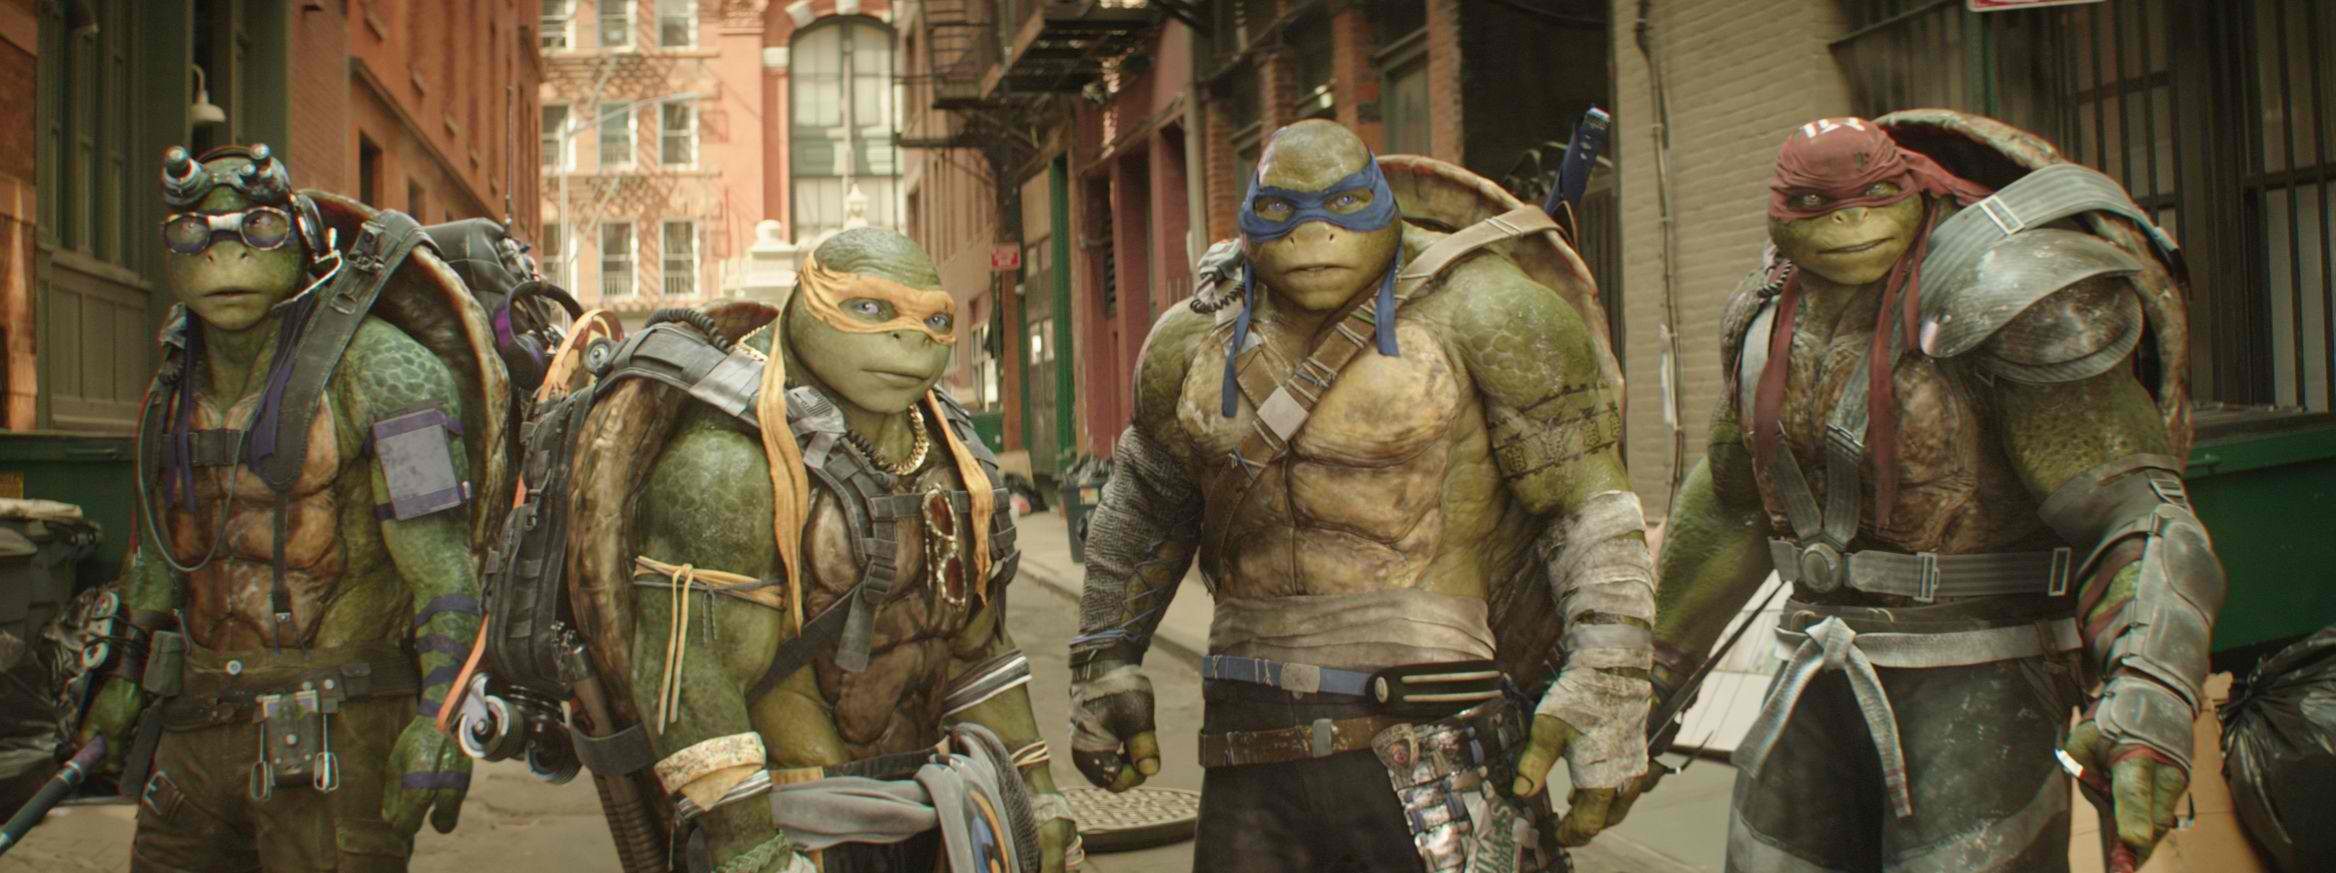 ‘Teenage Mutant Ninja Turtles: Out of the Shadows’ Review: Stale improvement